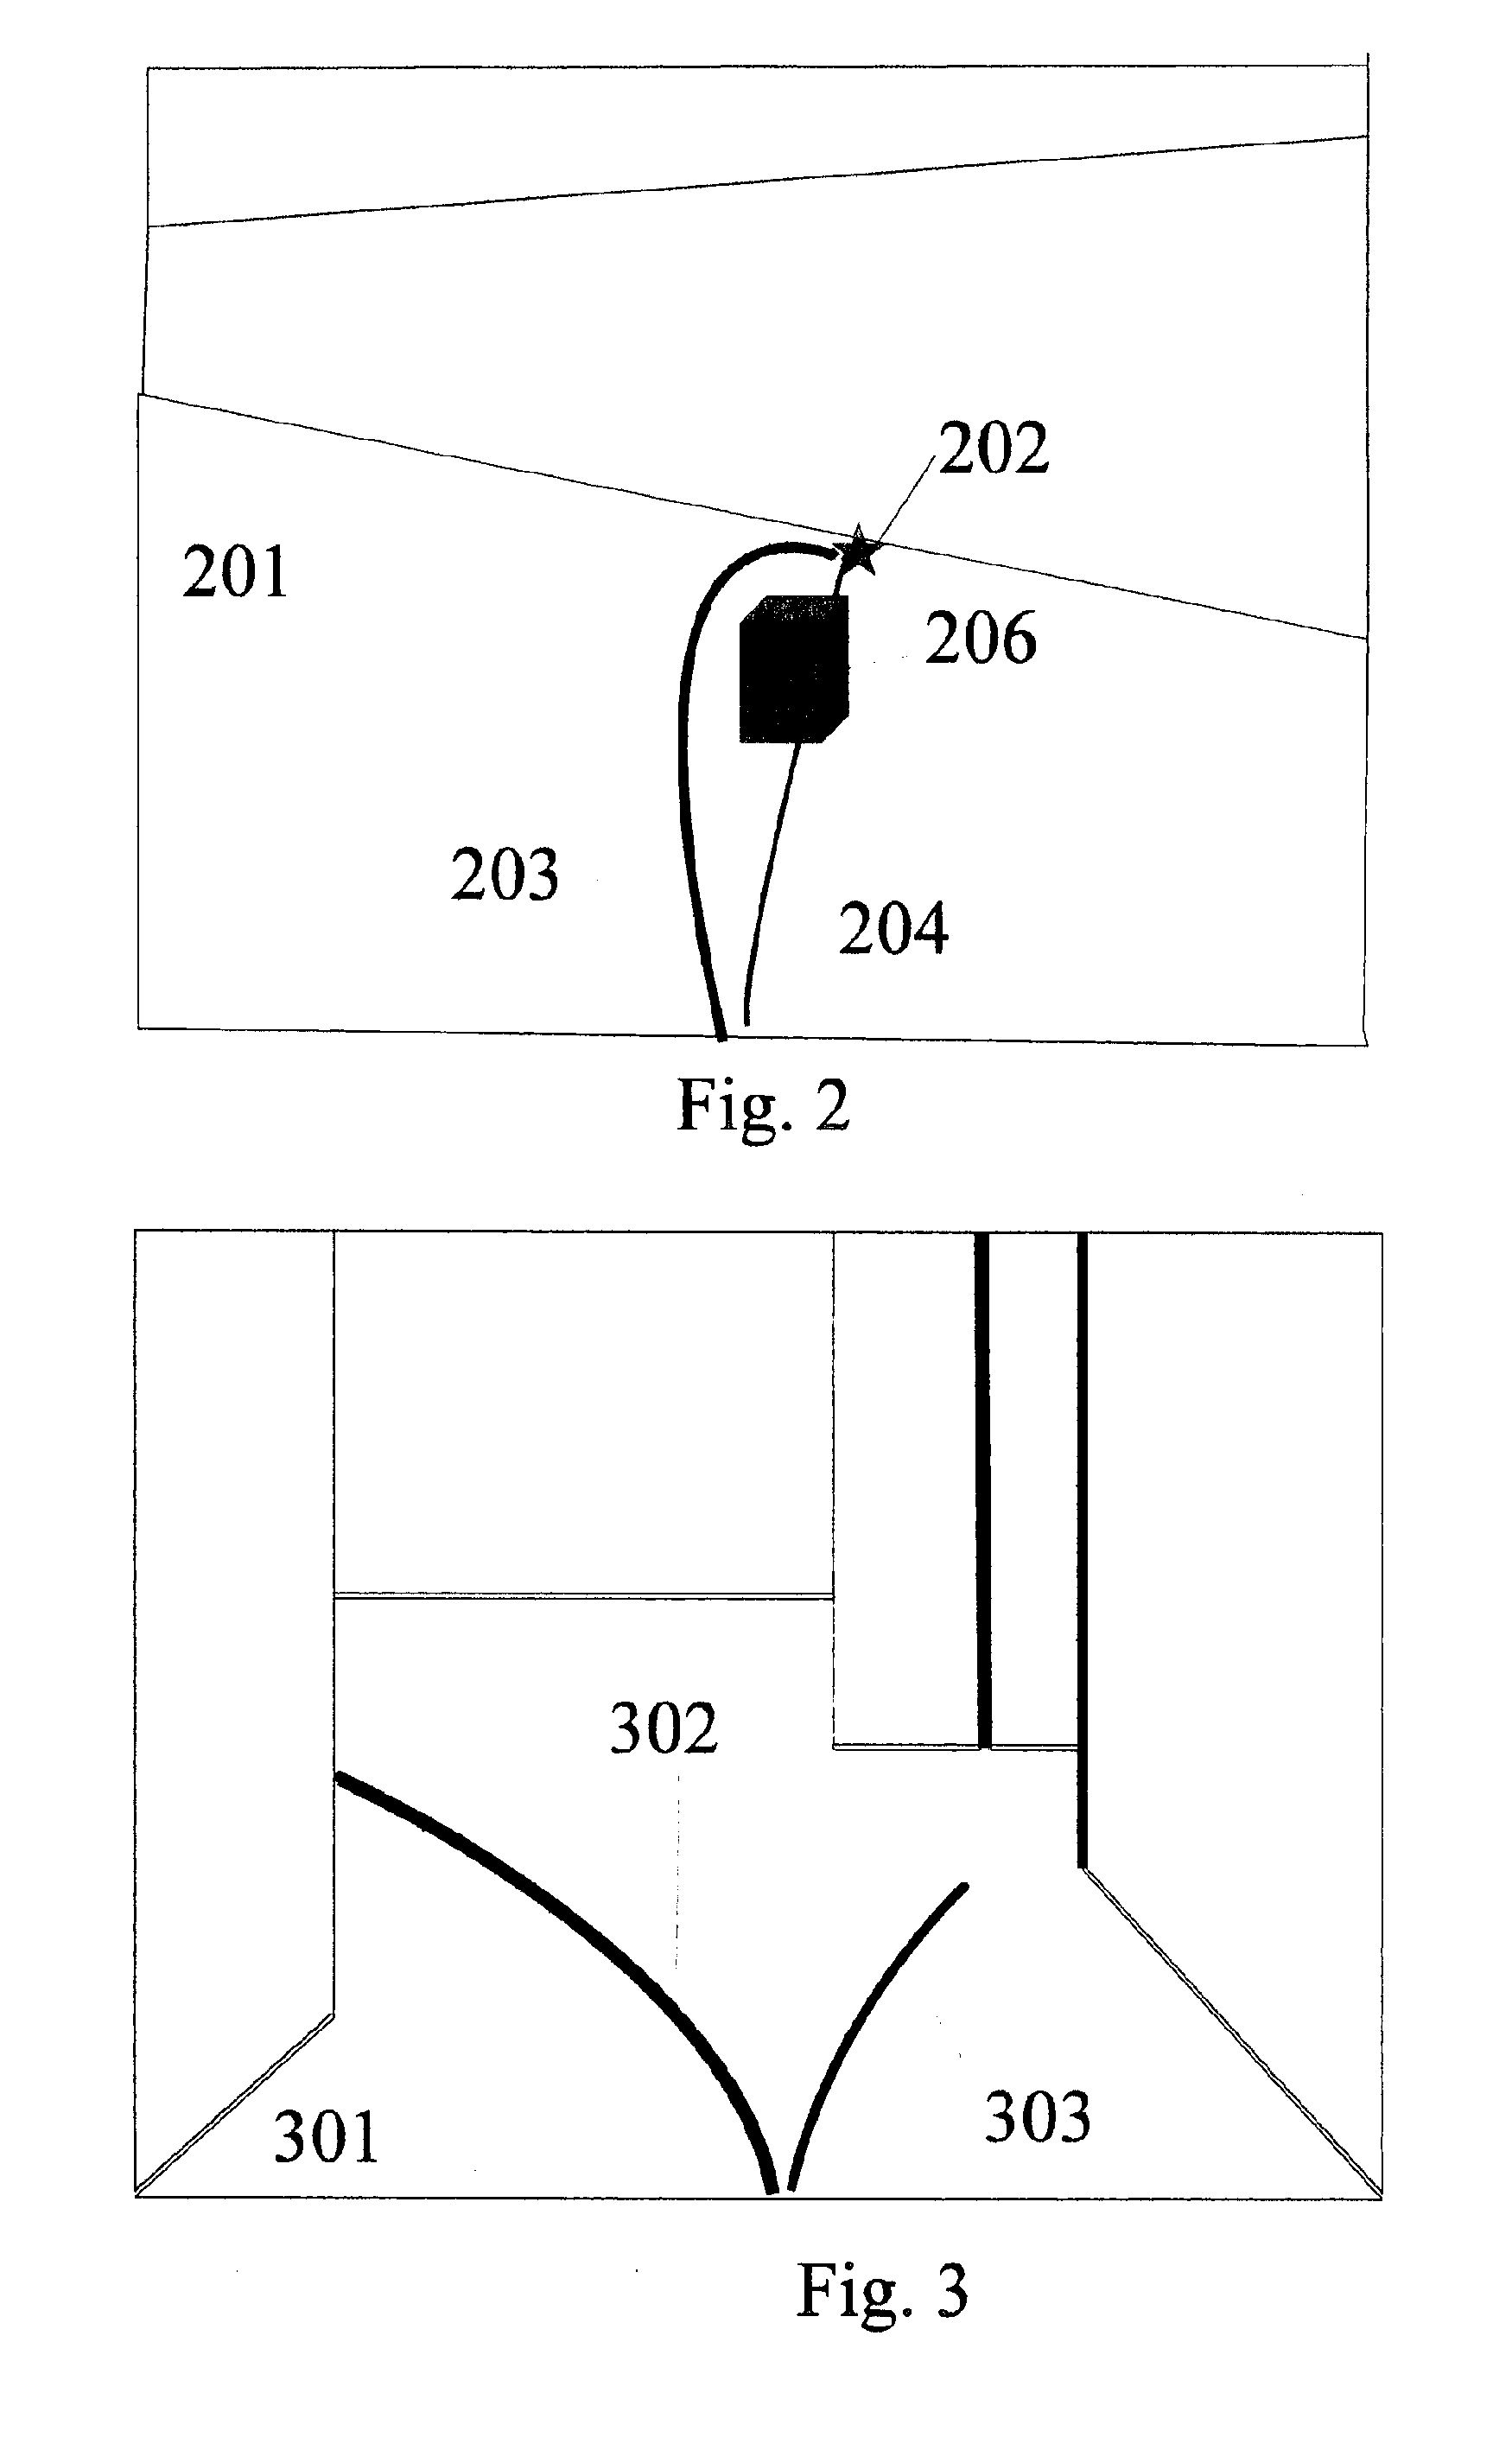 Method and apparatus for path planning, selection, and visualization